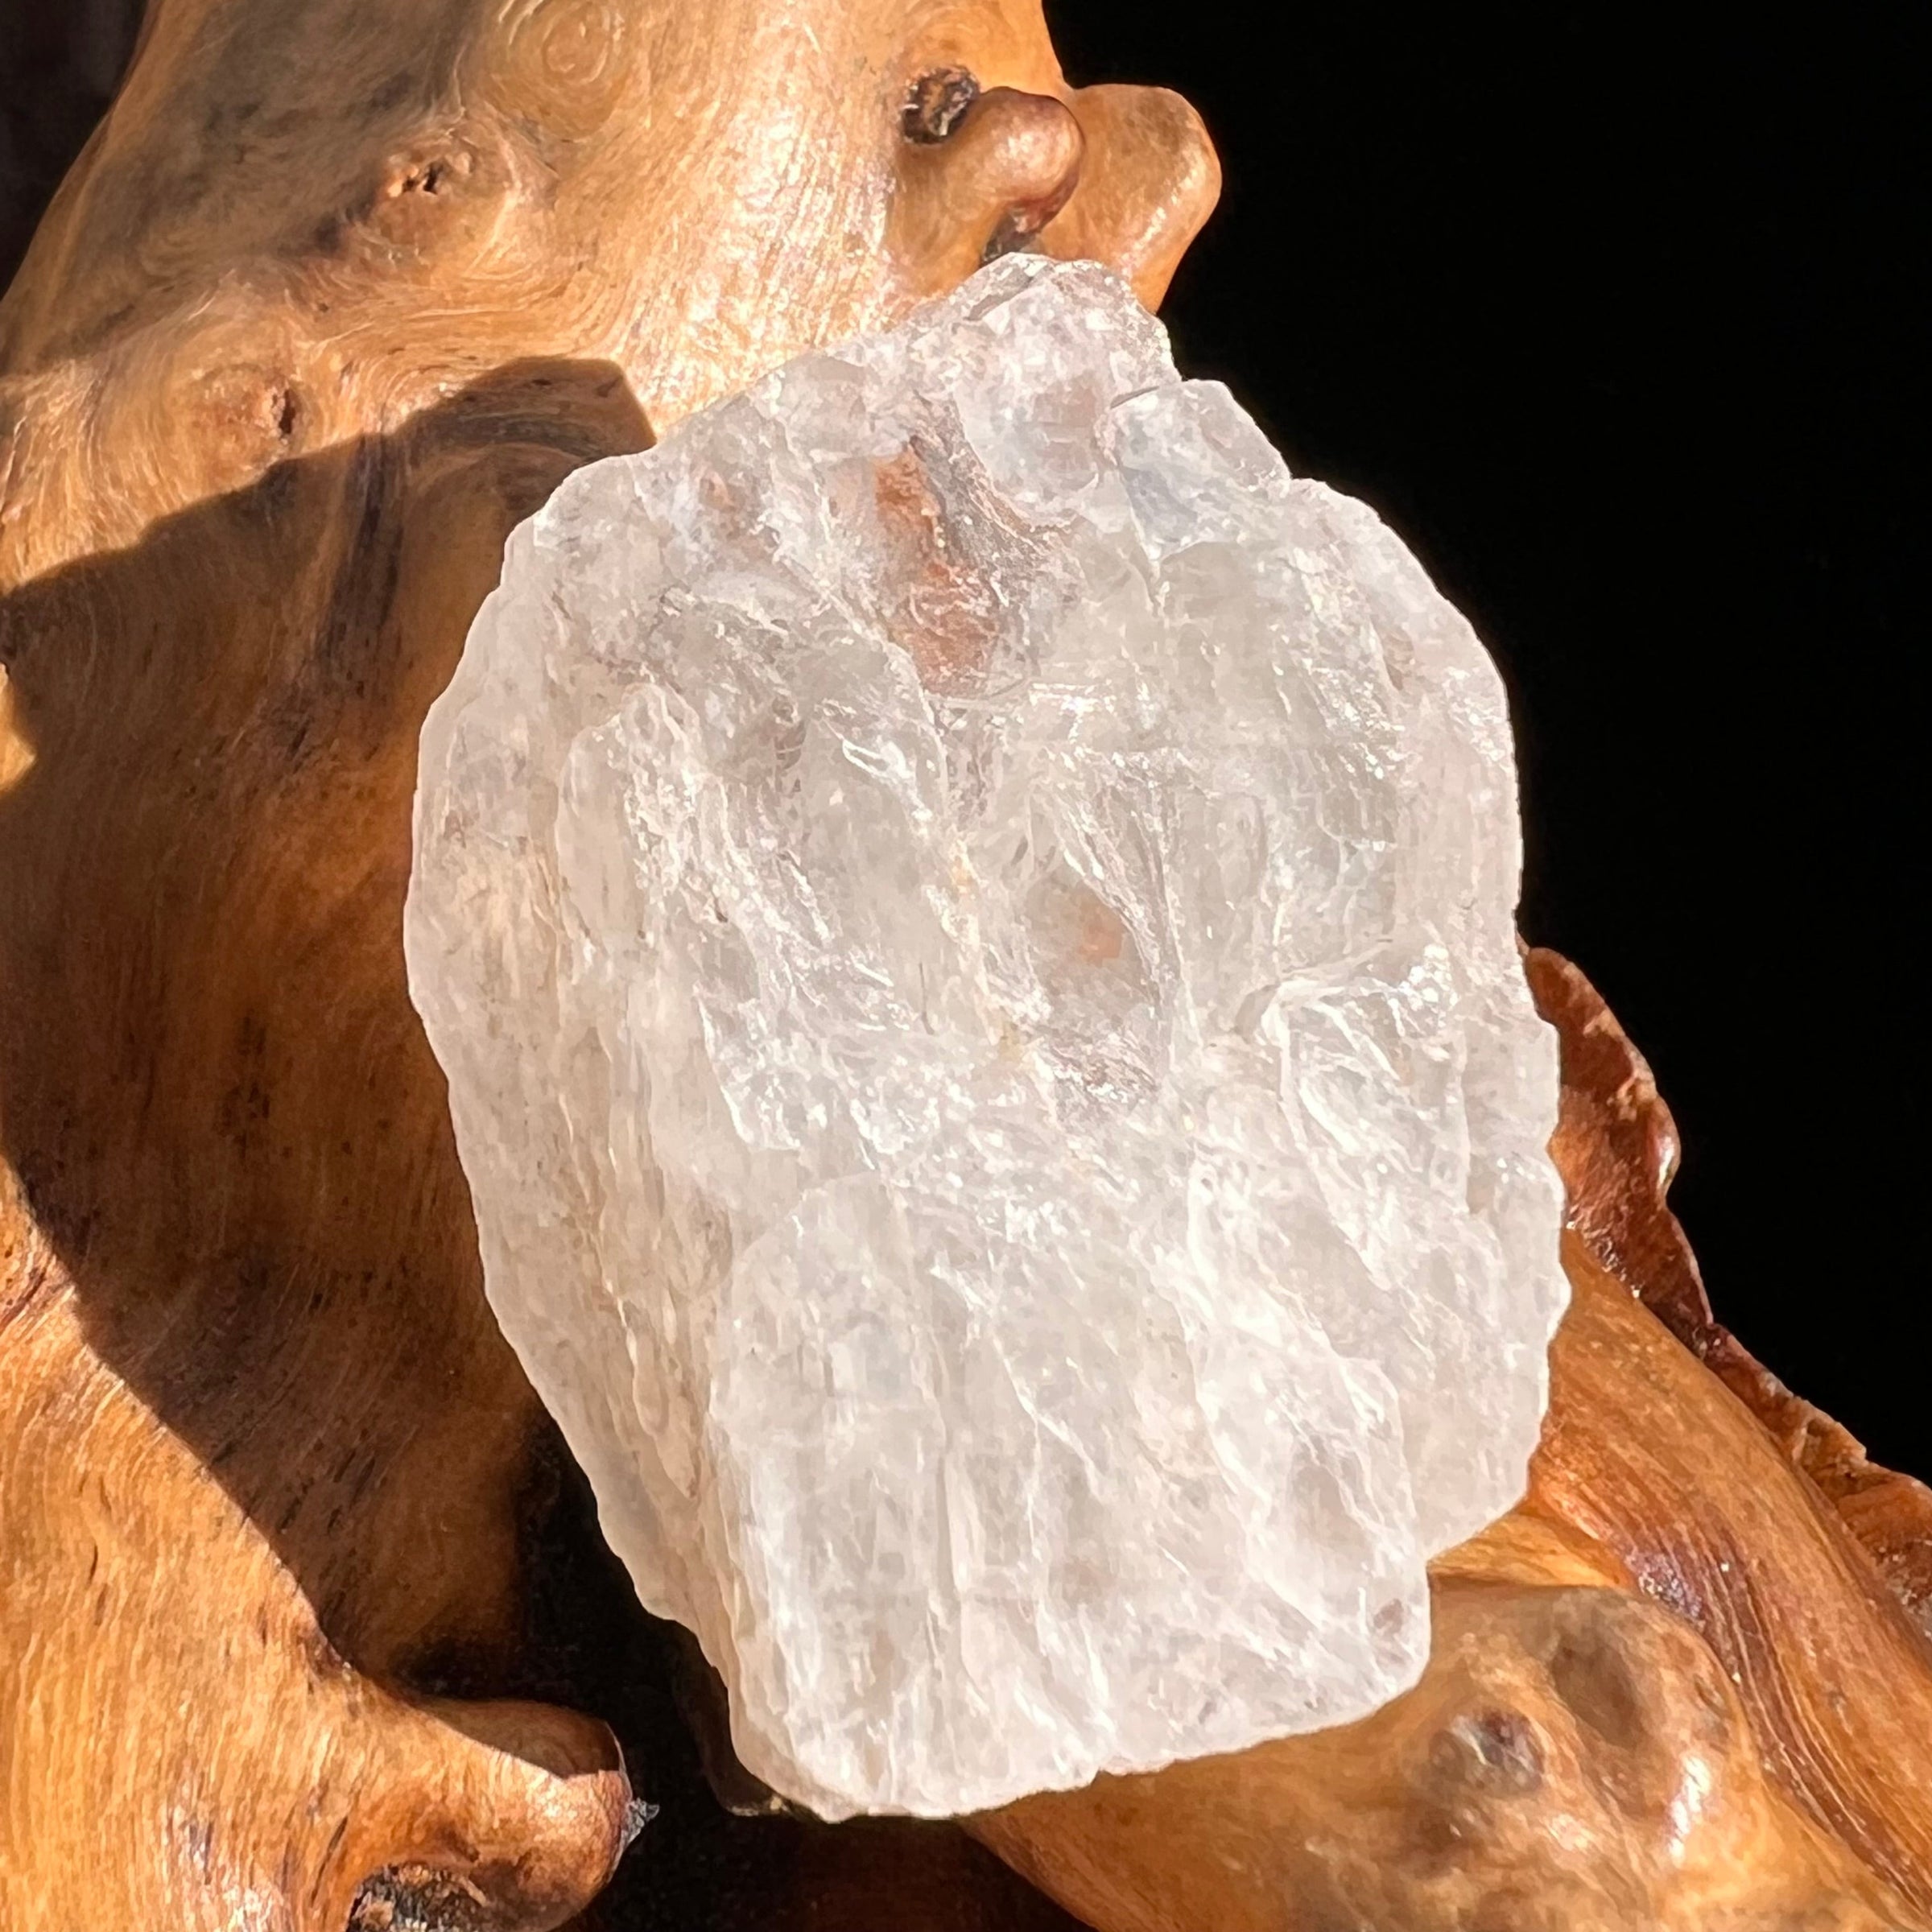 Petalite Crystal "Stone of the Angels" #5